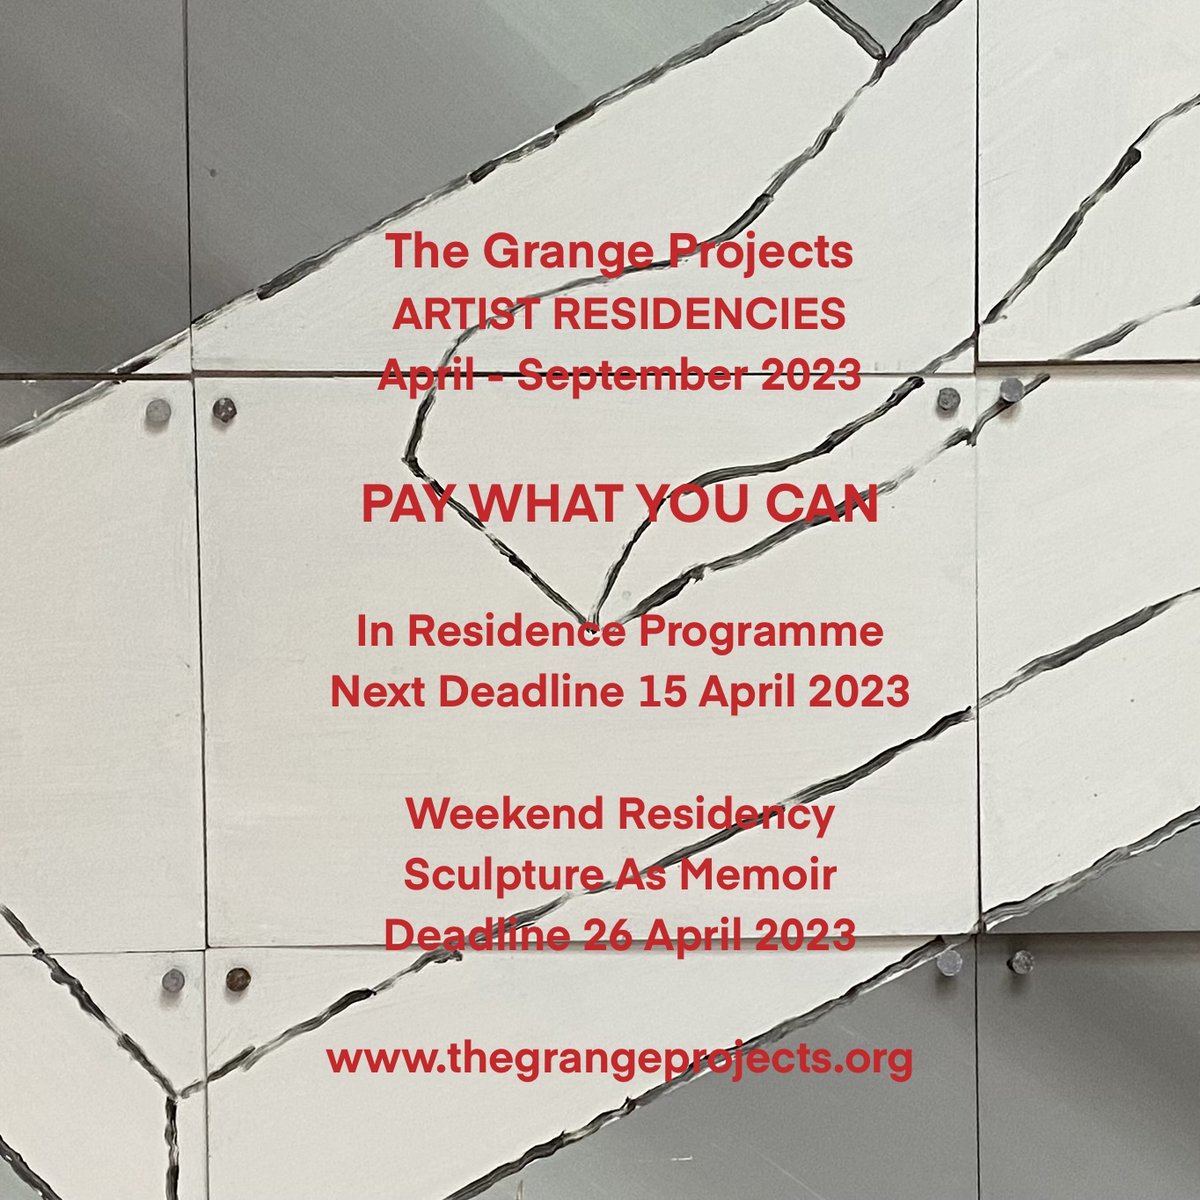 We welcome applications from all artists our residencies, offered in the spirit of generosity and reciprocity, are for a period of 1 - 3 weeks. Meals, accommodation work space are provided. thegrangeprojects.org/in-residence-2…
#ArtistOpenCalls #artistopencalls #artistresidency #artist